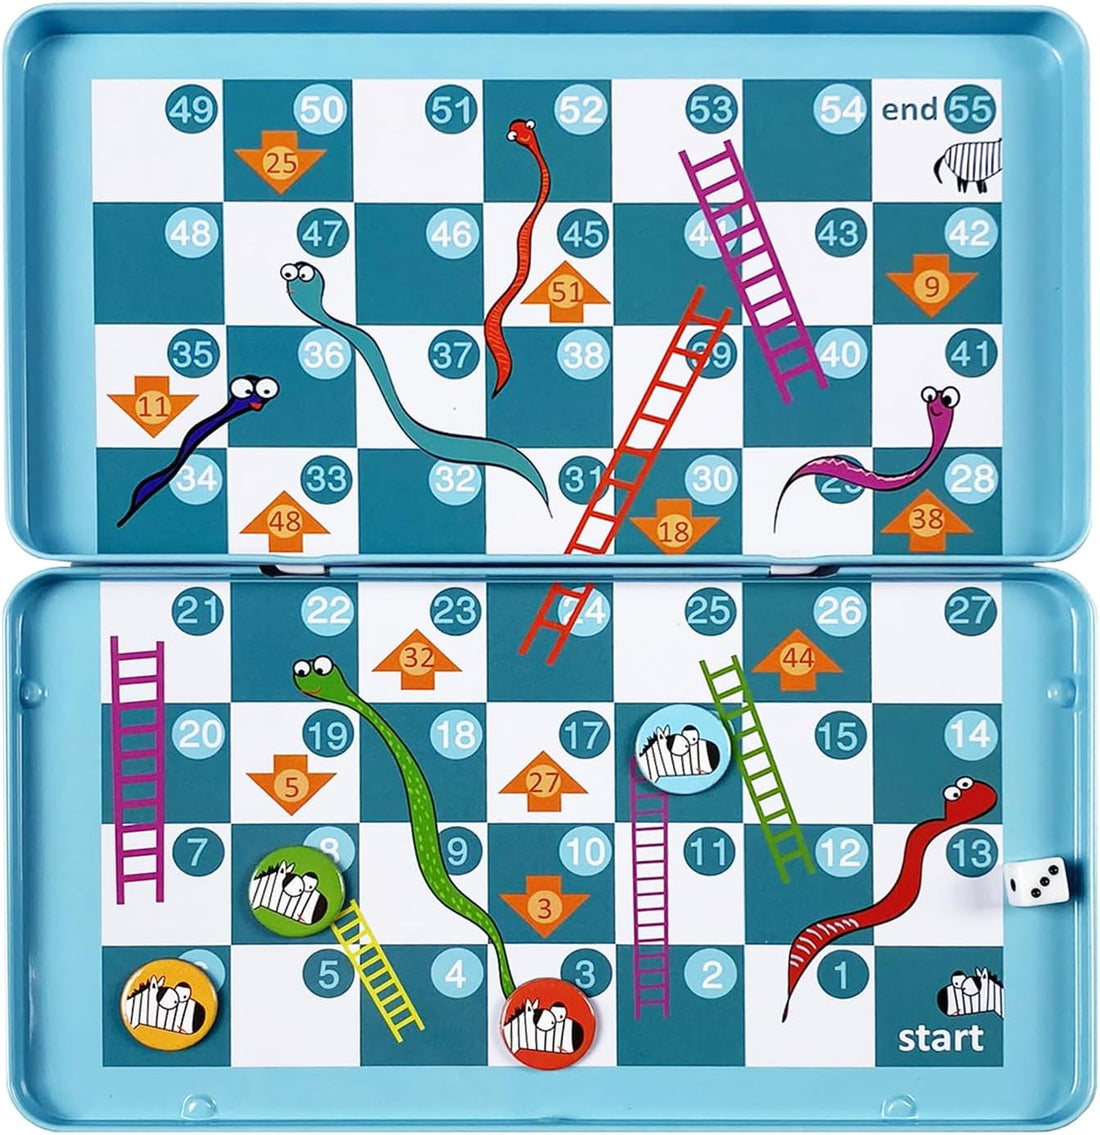 Snakes and Ladders Preview #2